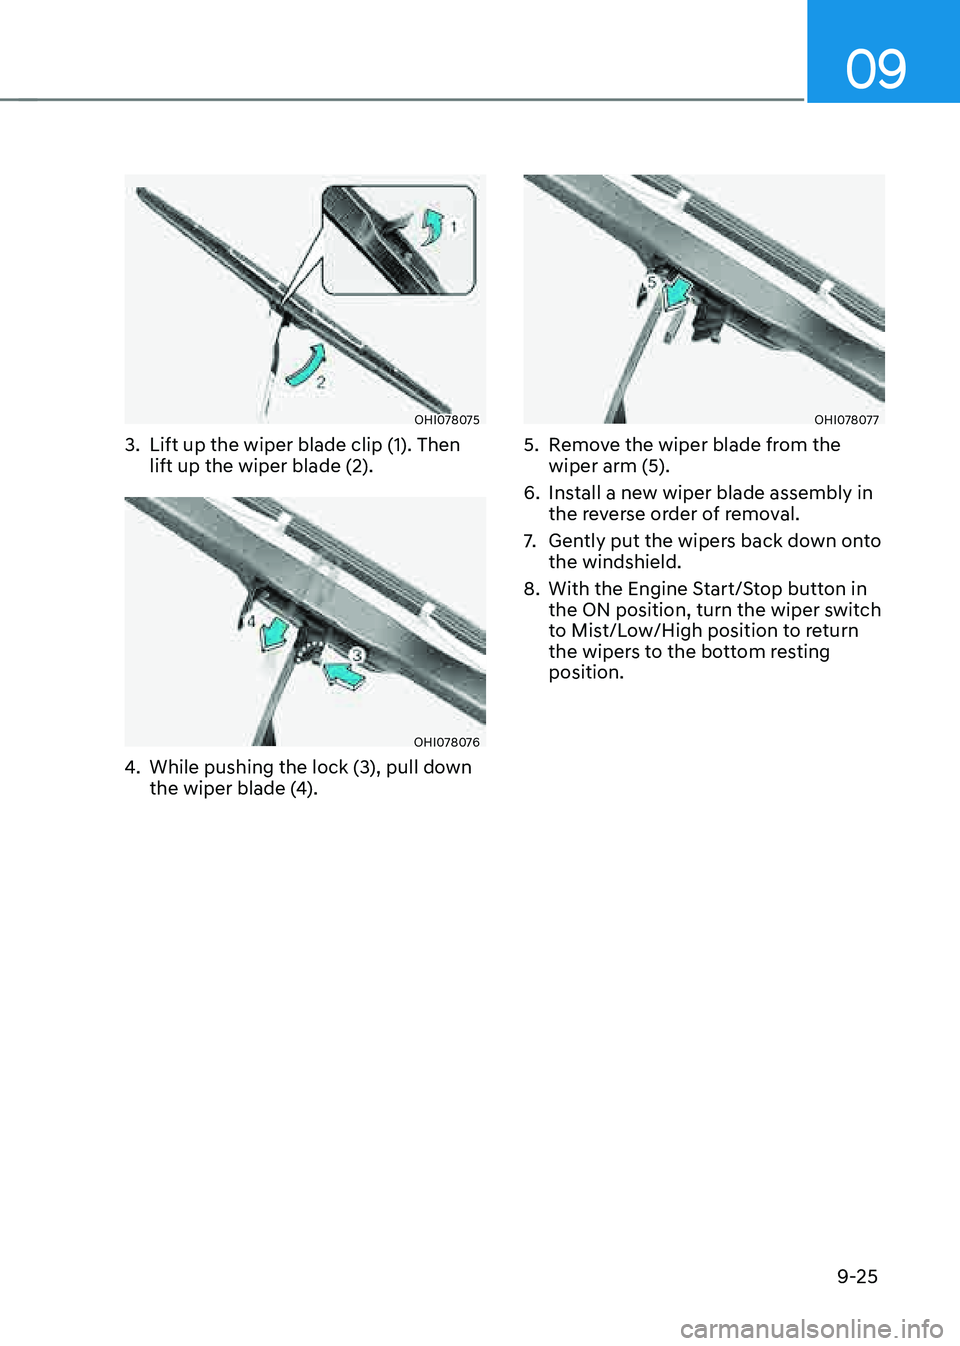 GENESIS GV80 2021  Owners Manual 09
9-25
OHI078075OHI078075
3. Lift up the wiper blade clip (1). Then 
lift up the wiper blade (2).
OHI078076OHI078076
4. While pushing the lock (3), pull down 
the wiper blade (4).
OHI078077OHI078077
